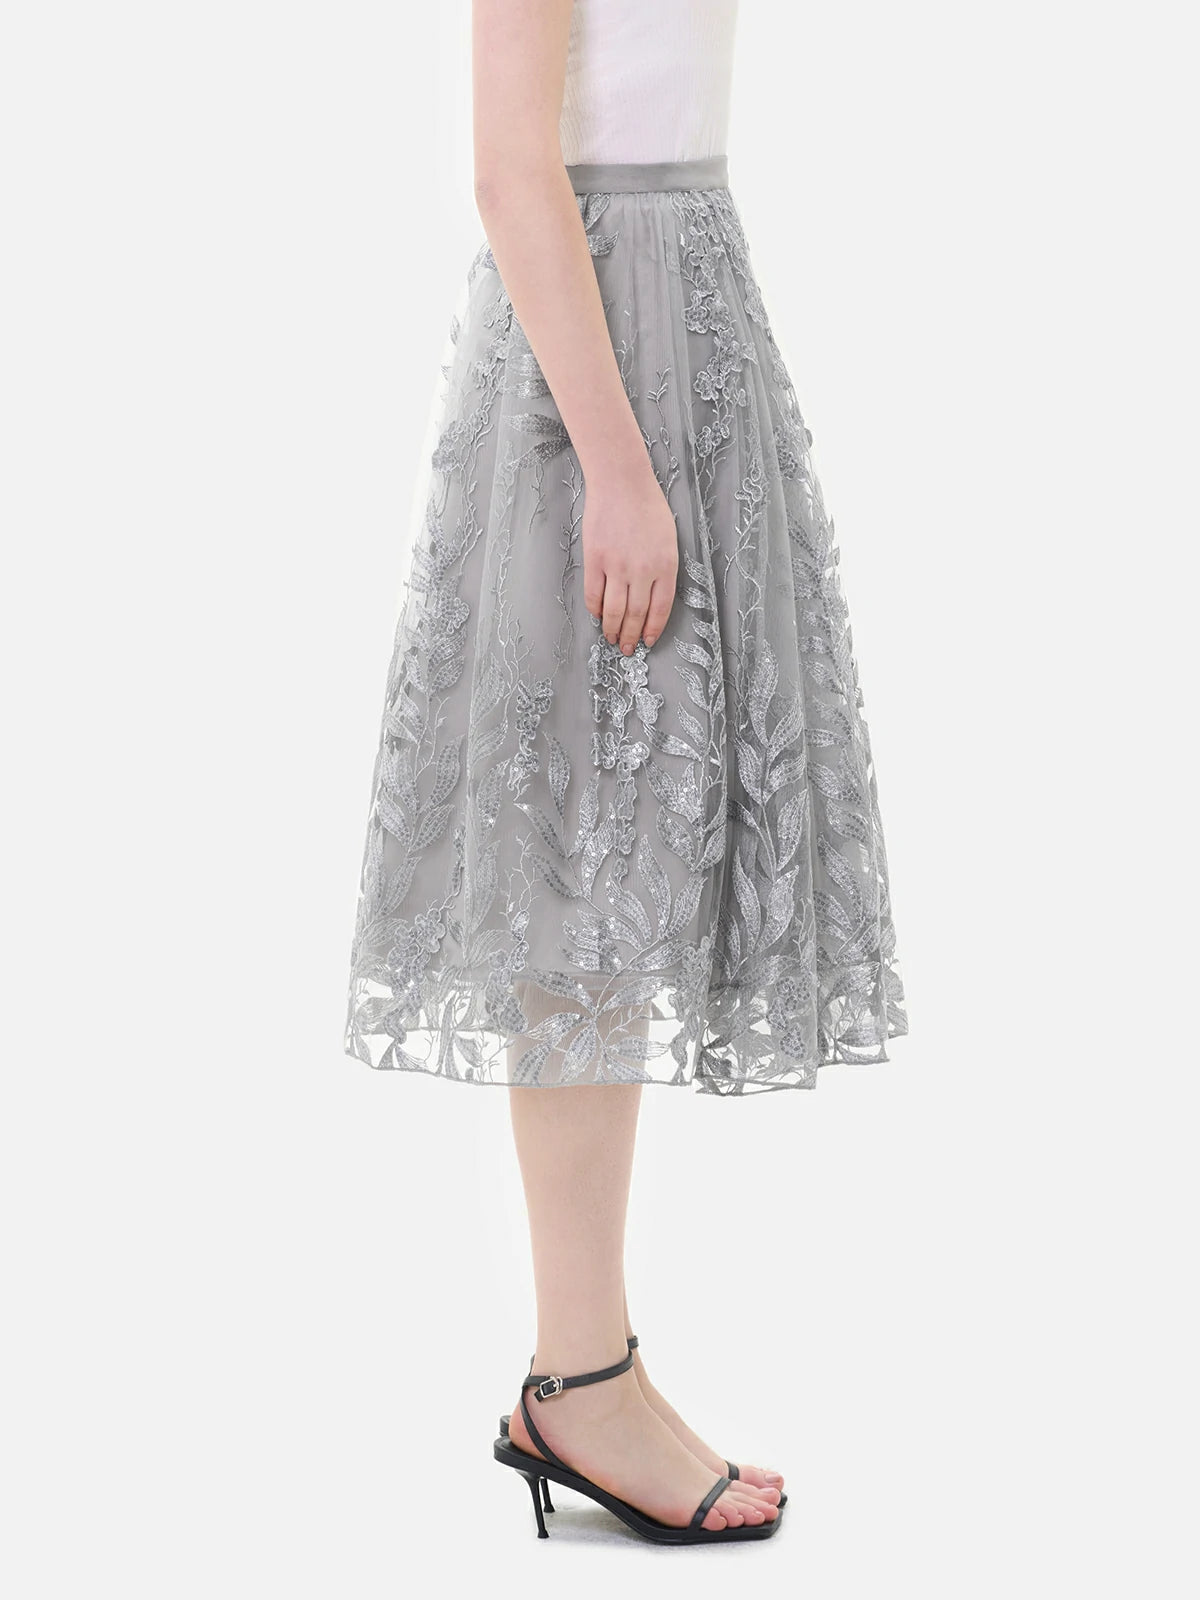 Experience the versatility of this elegant A-line tulle skirt with its embroidered floral design and sequin embellishments.